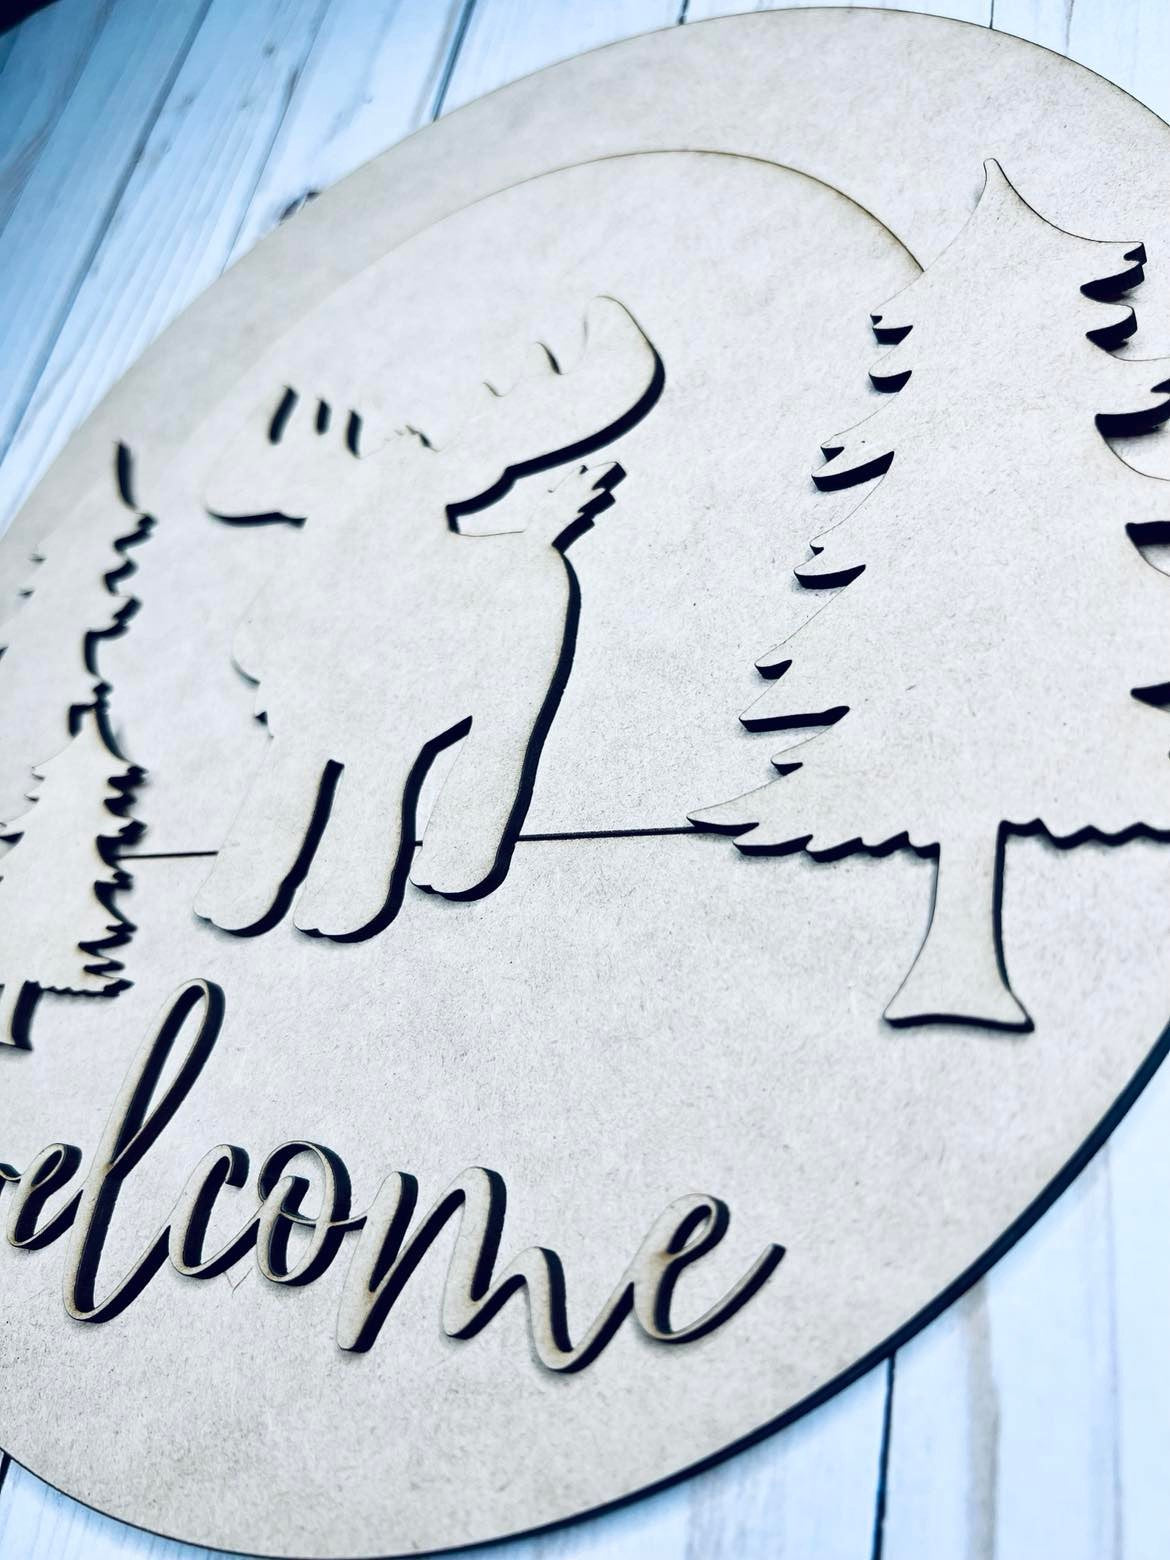 Moose Welcome Sign Kit - Ready to Paint - 10.5"